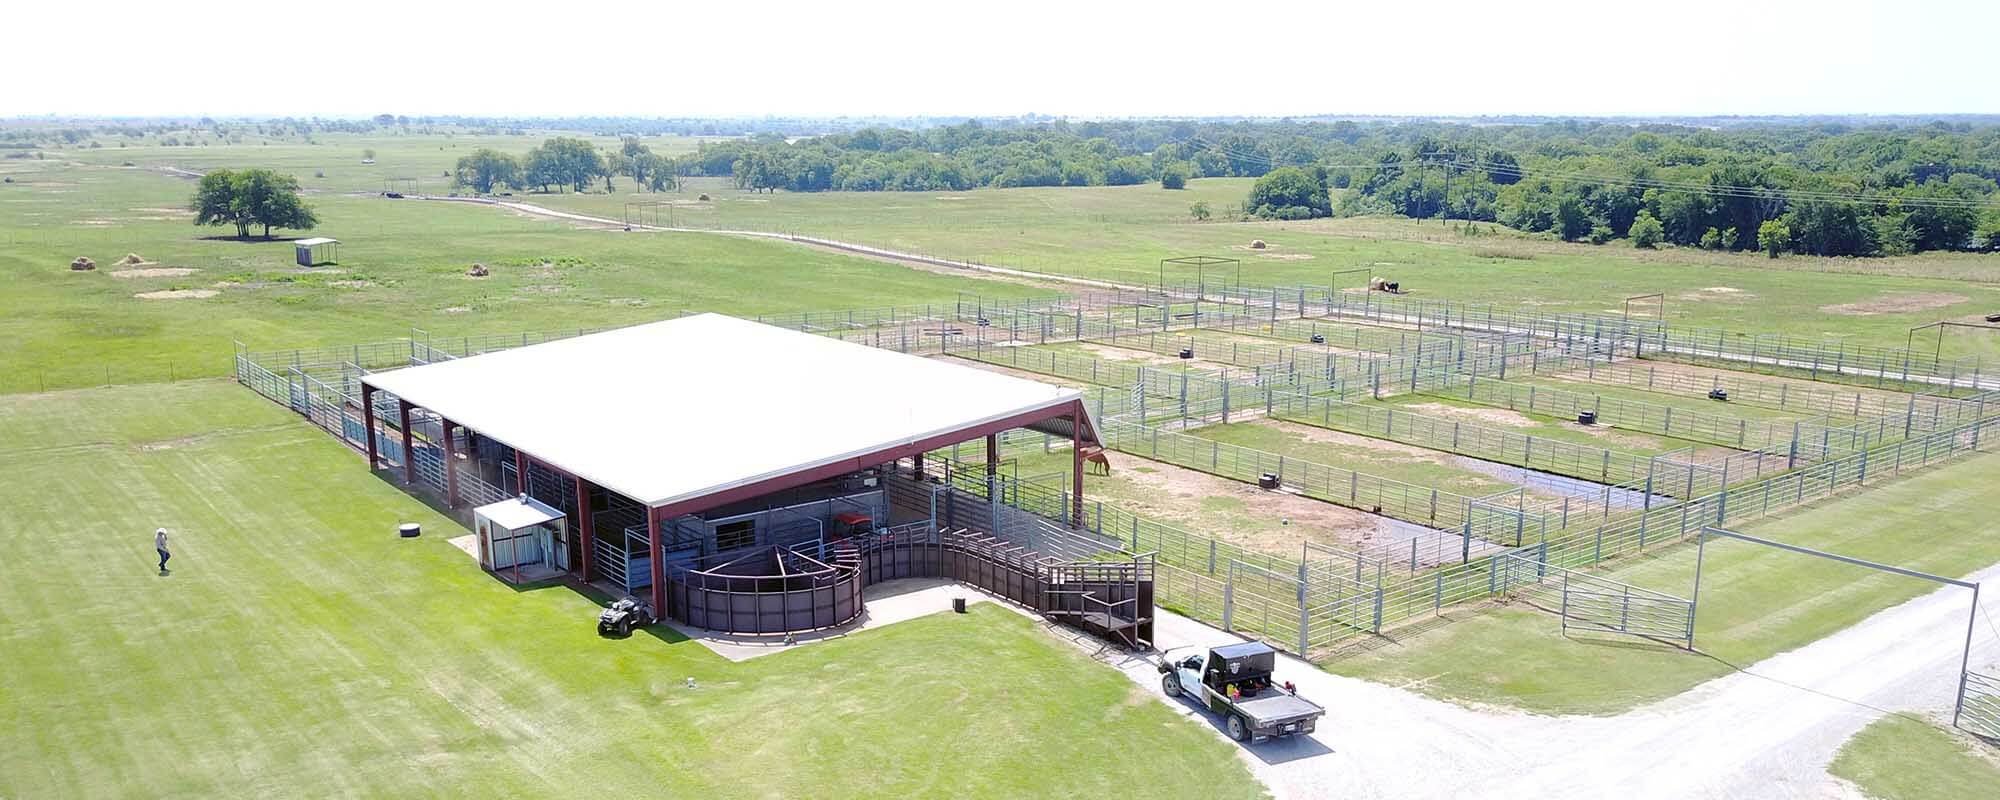 Aerial view of a cattle handling facility